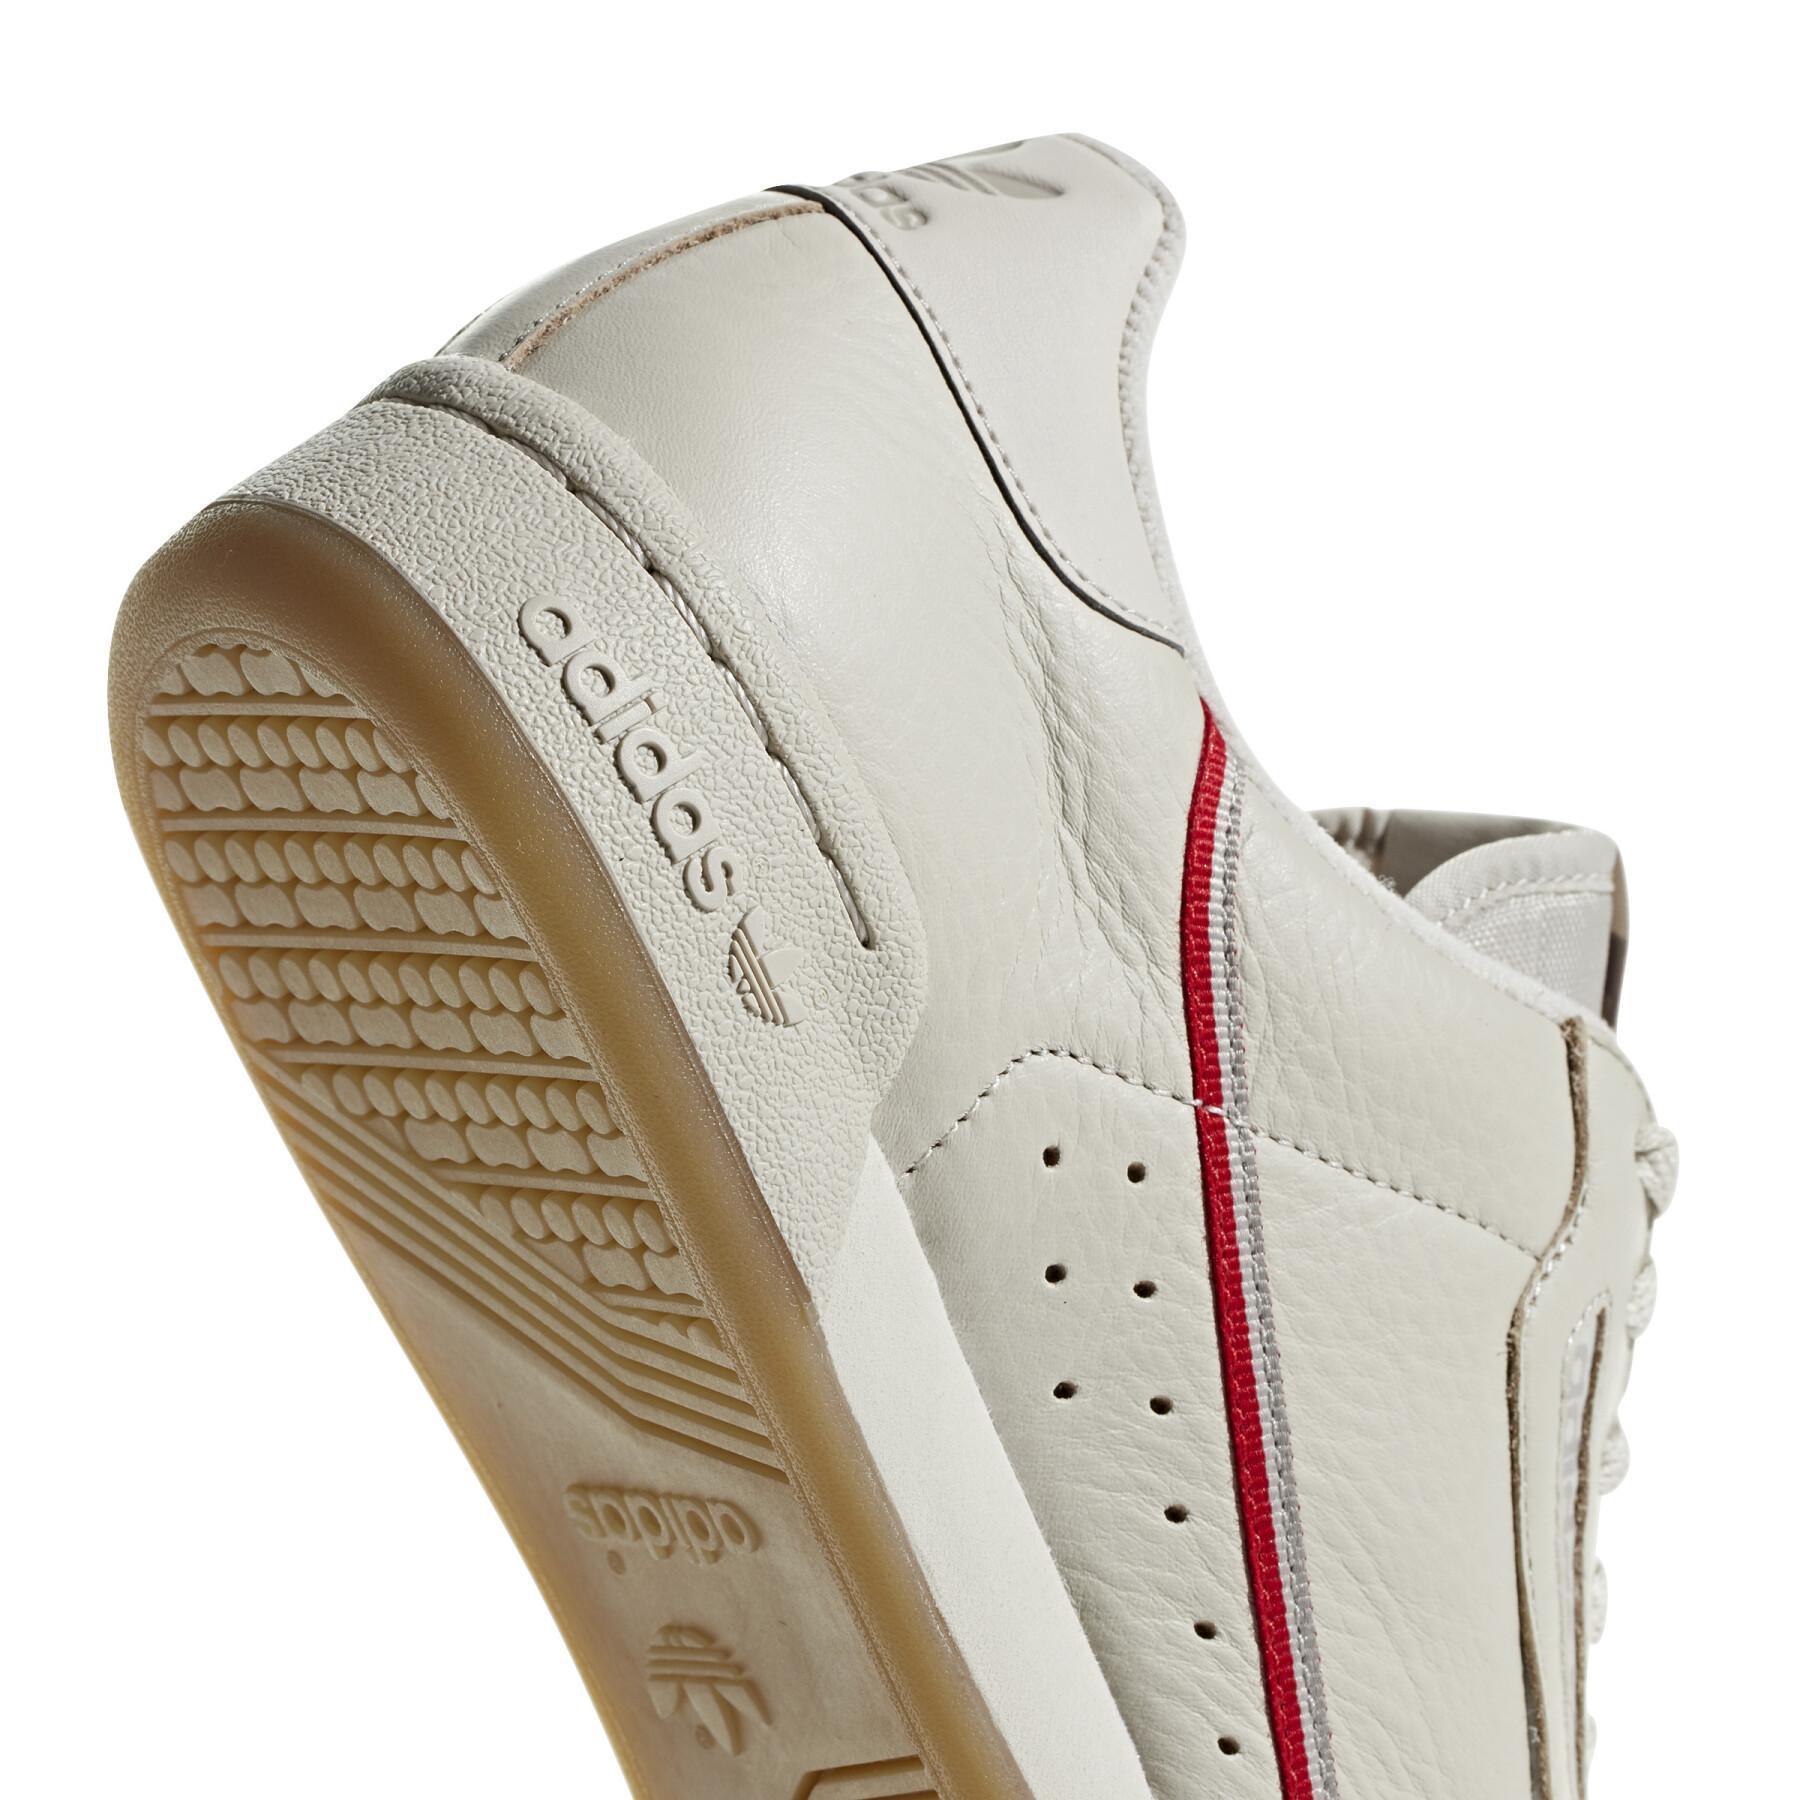 Sneakers adidas Continental 80